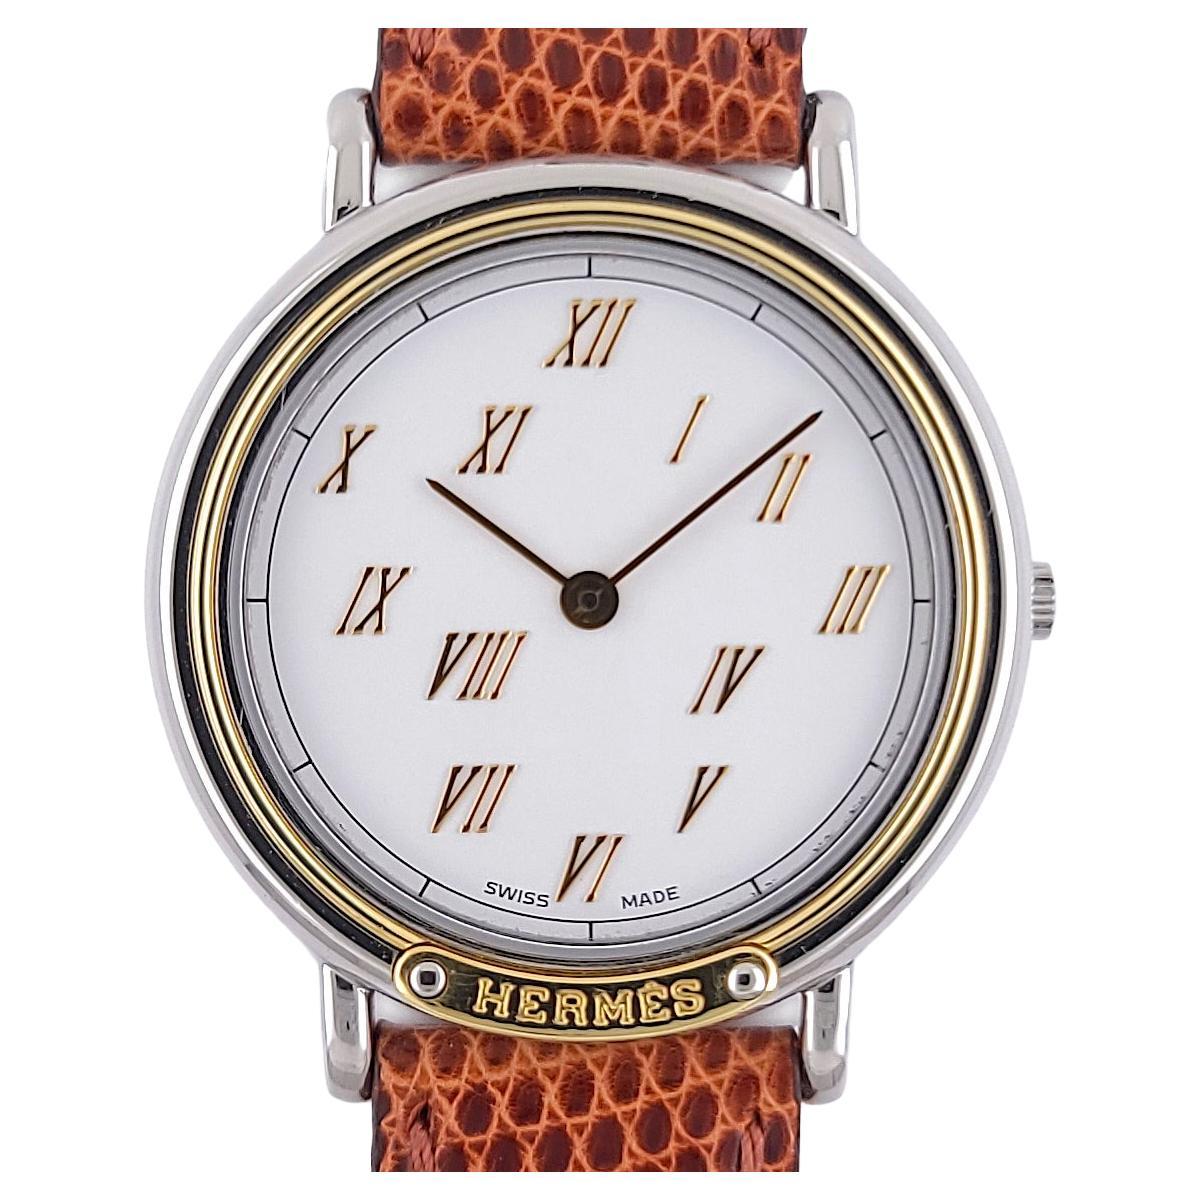 Hermes Paris Meteor 18k Gold and Stainless Steel Meteore 1990 Clipper Kelly